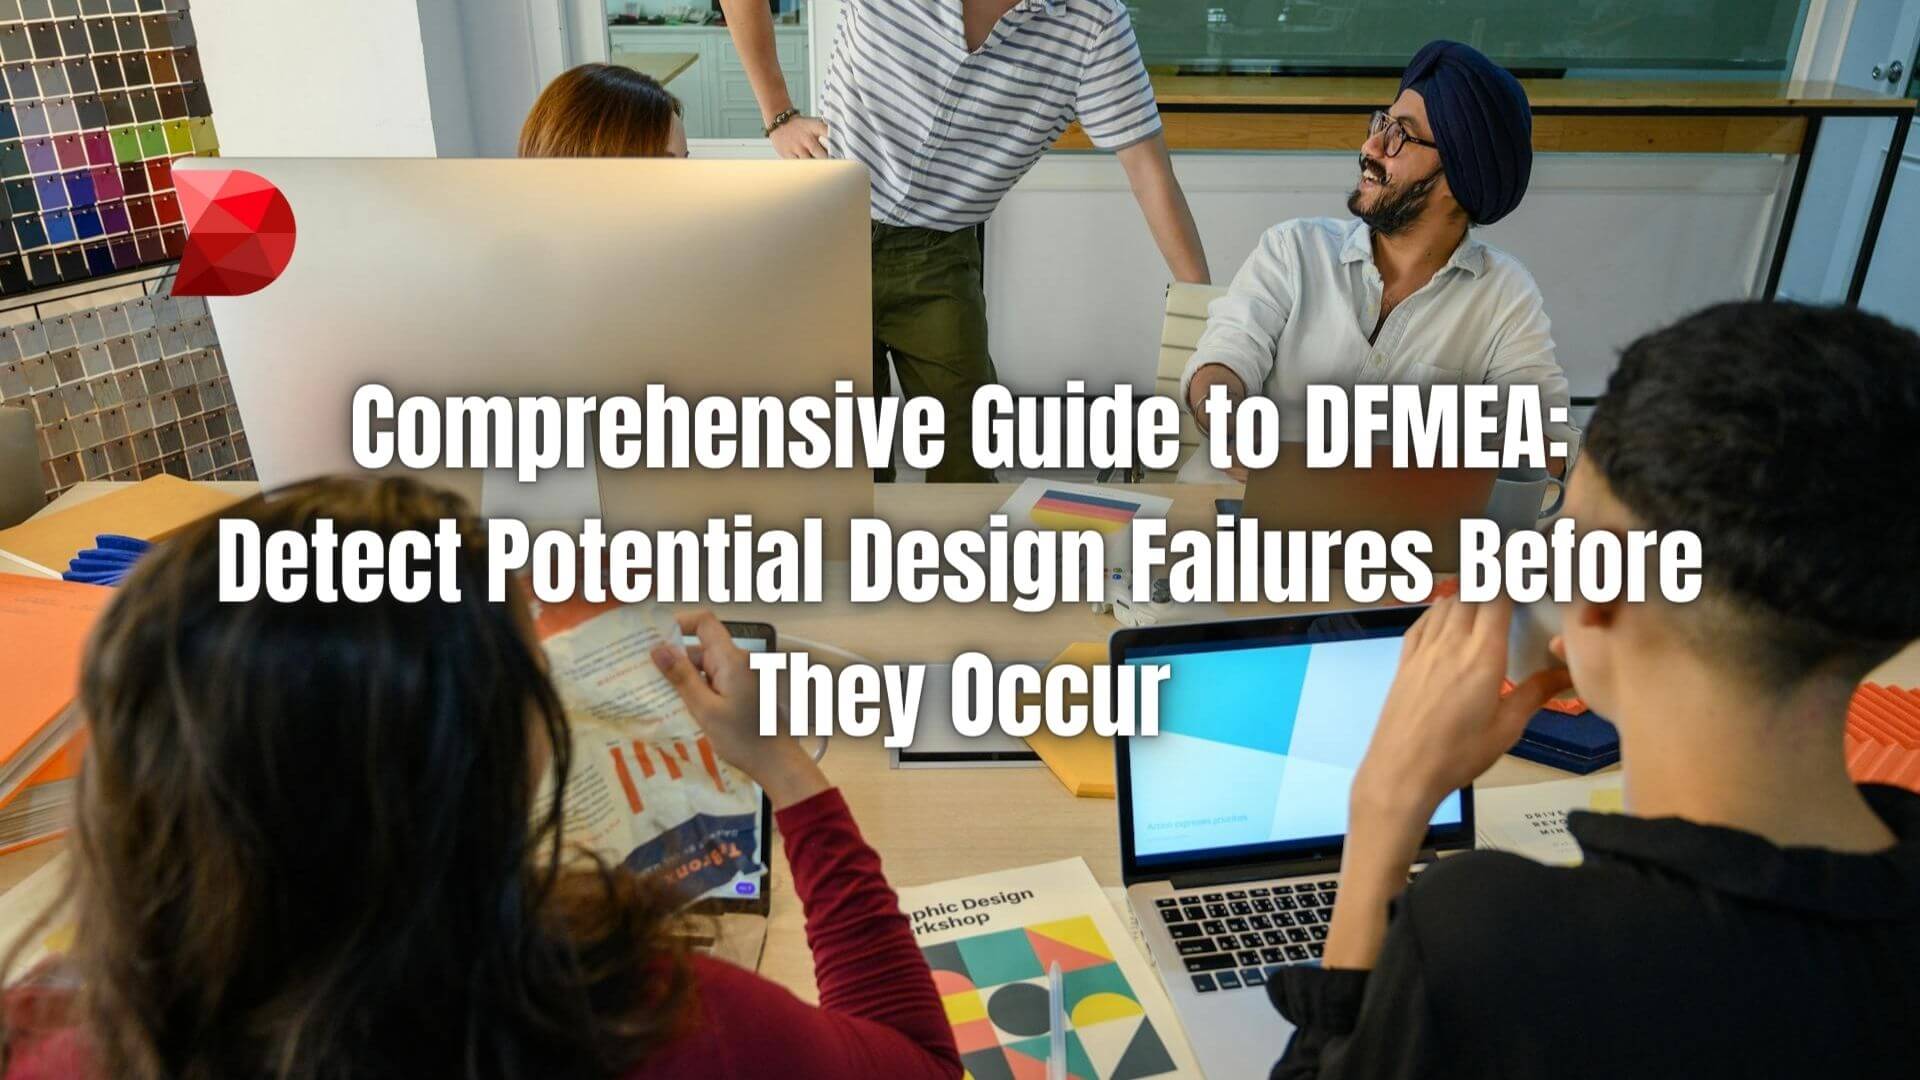 Unlock insights with our guide to DFMEA examples. Learn to anticipate design flaws before they happen for smoother product development.